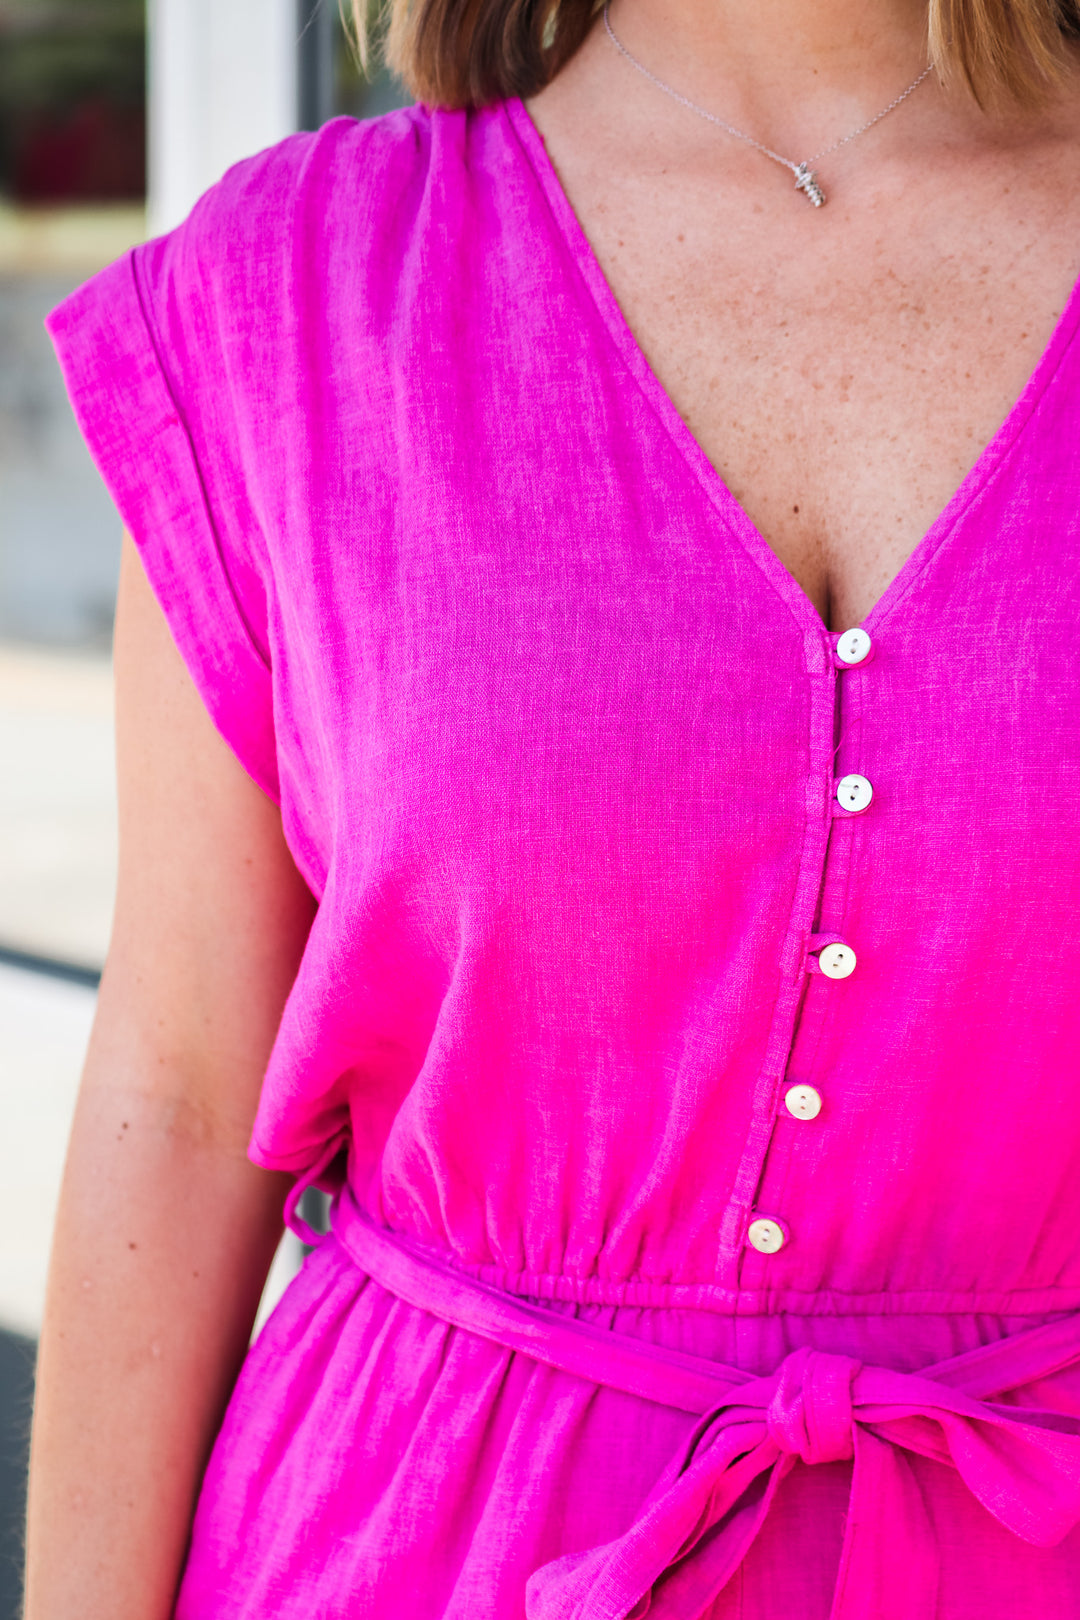 Girl wearing a hot pink romper with button closure on top and elastic waist.